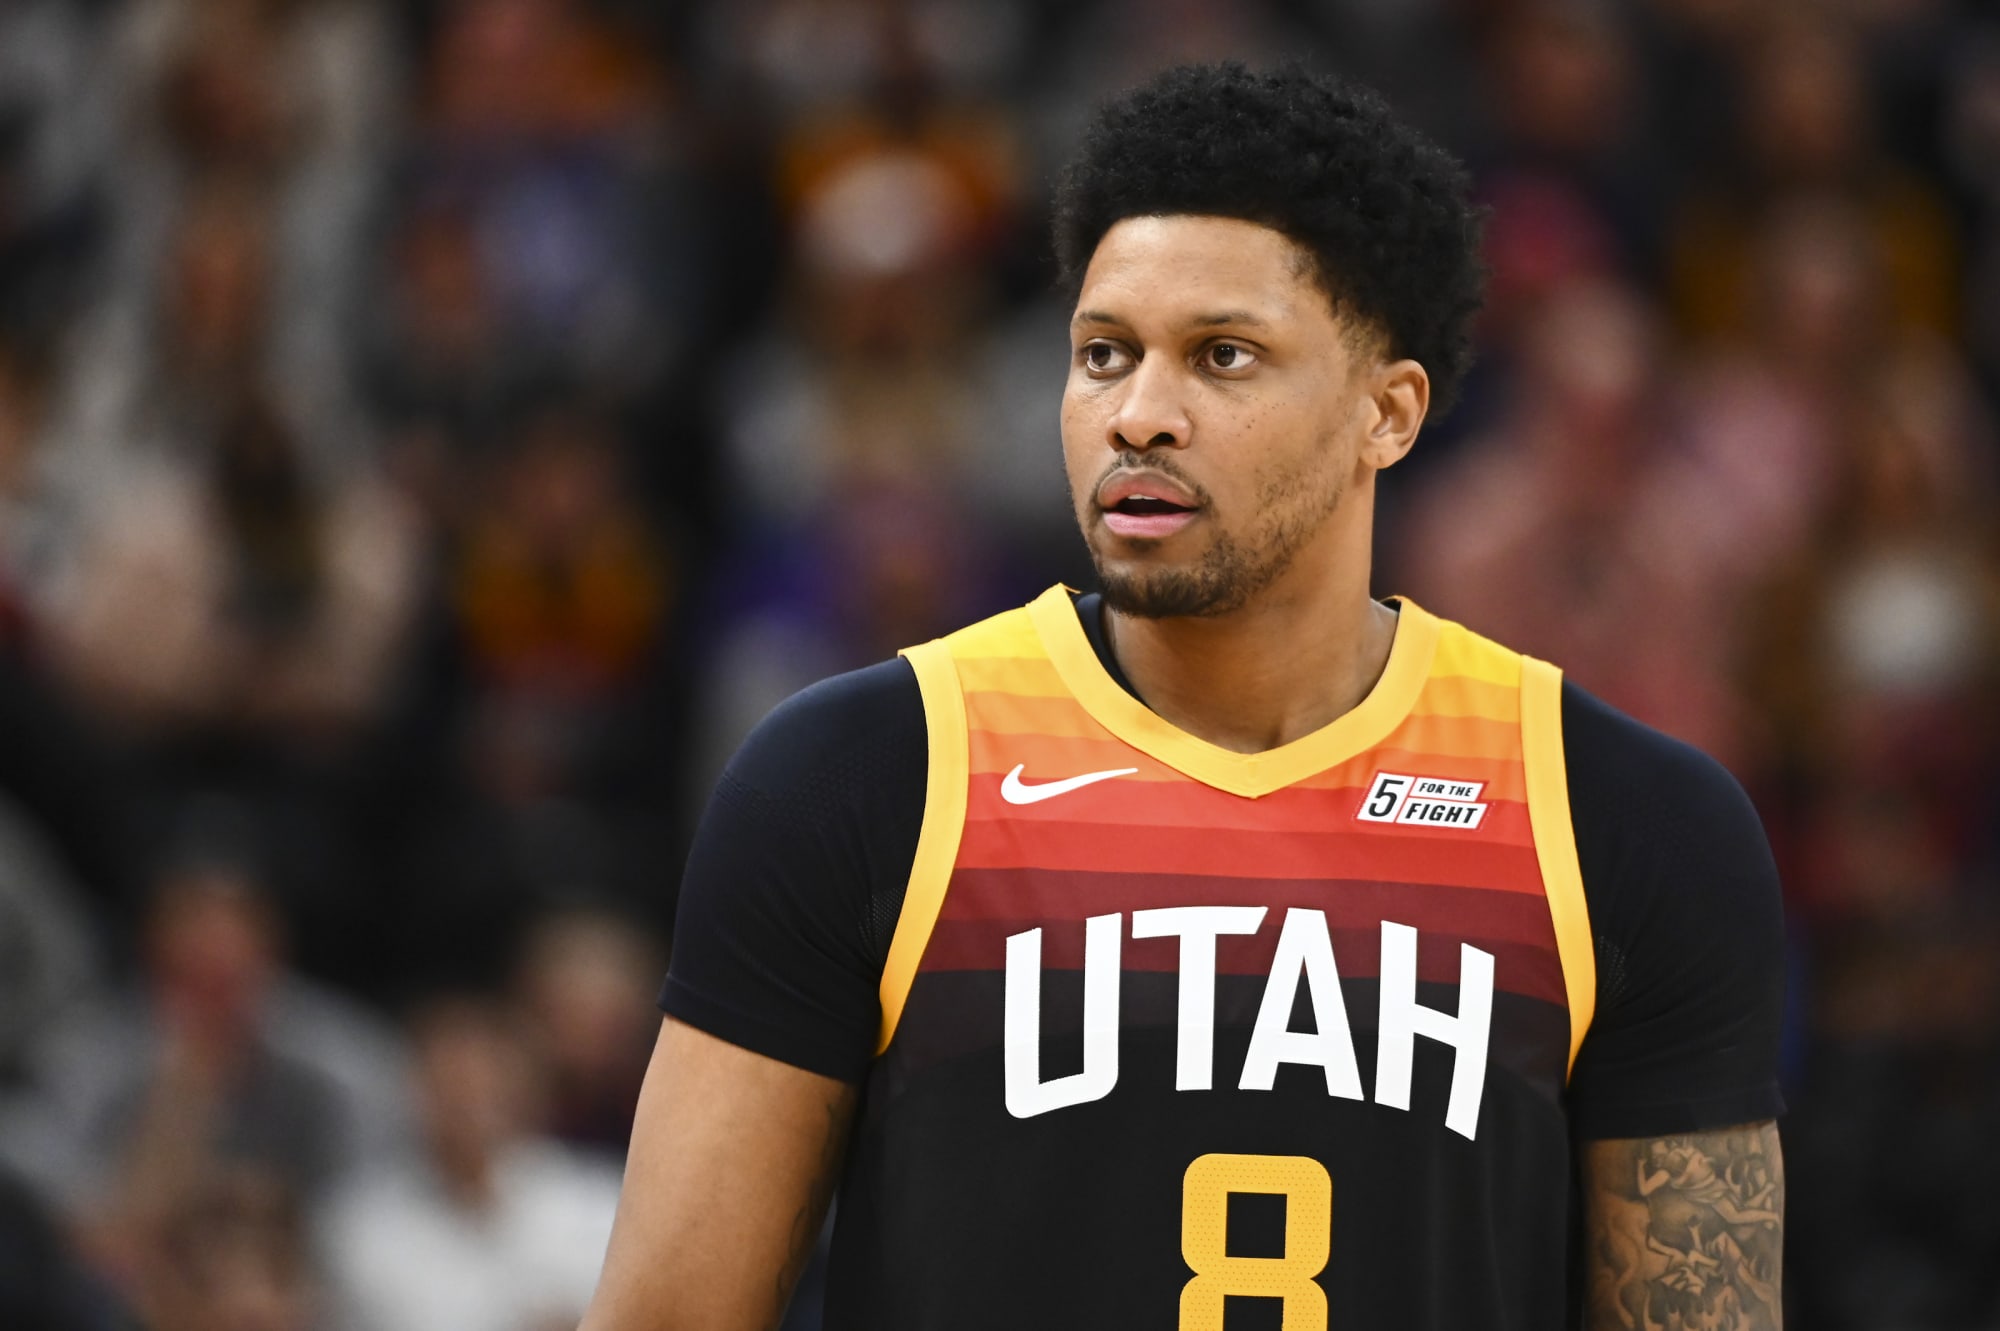 3 Jazz players on the chopping block the Lakers could sign